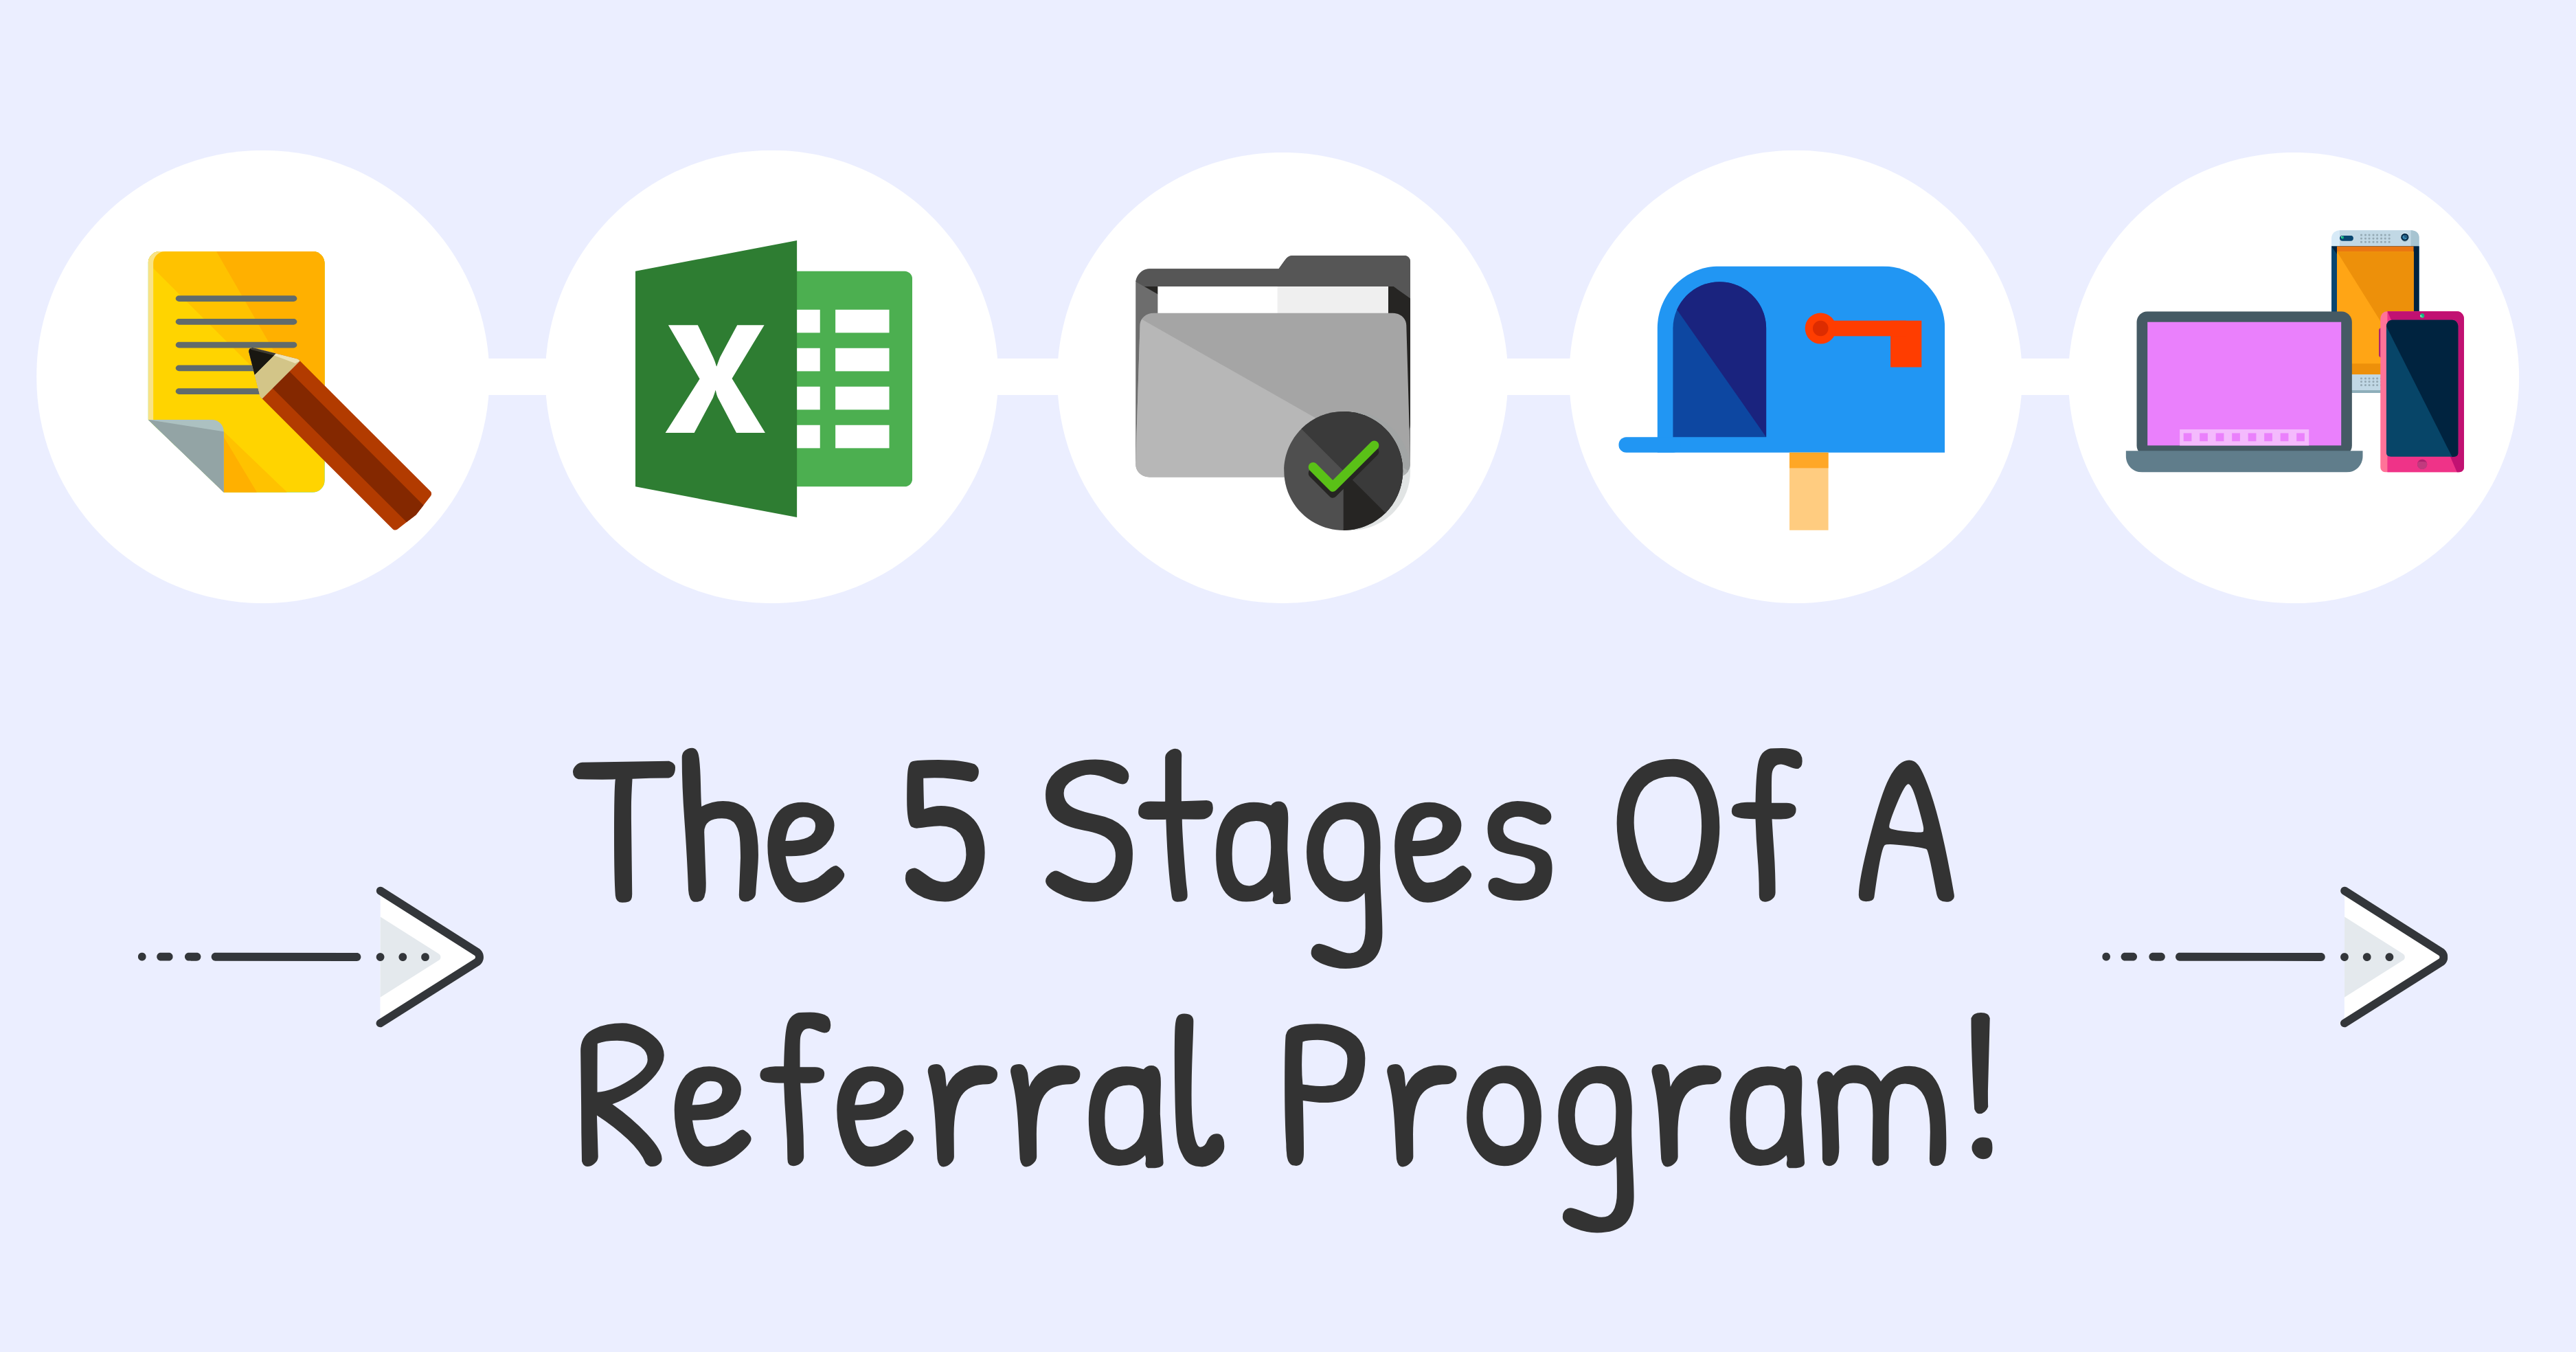 10 Tips to Sustain the Flow of Referrals & Introductions